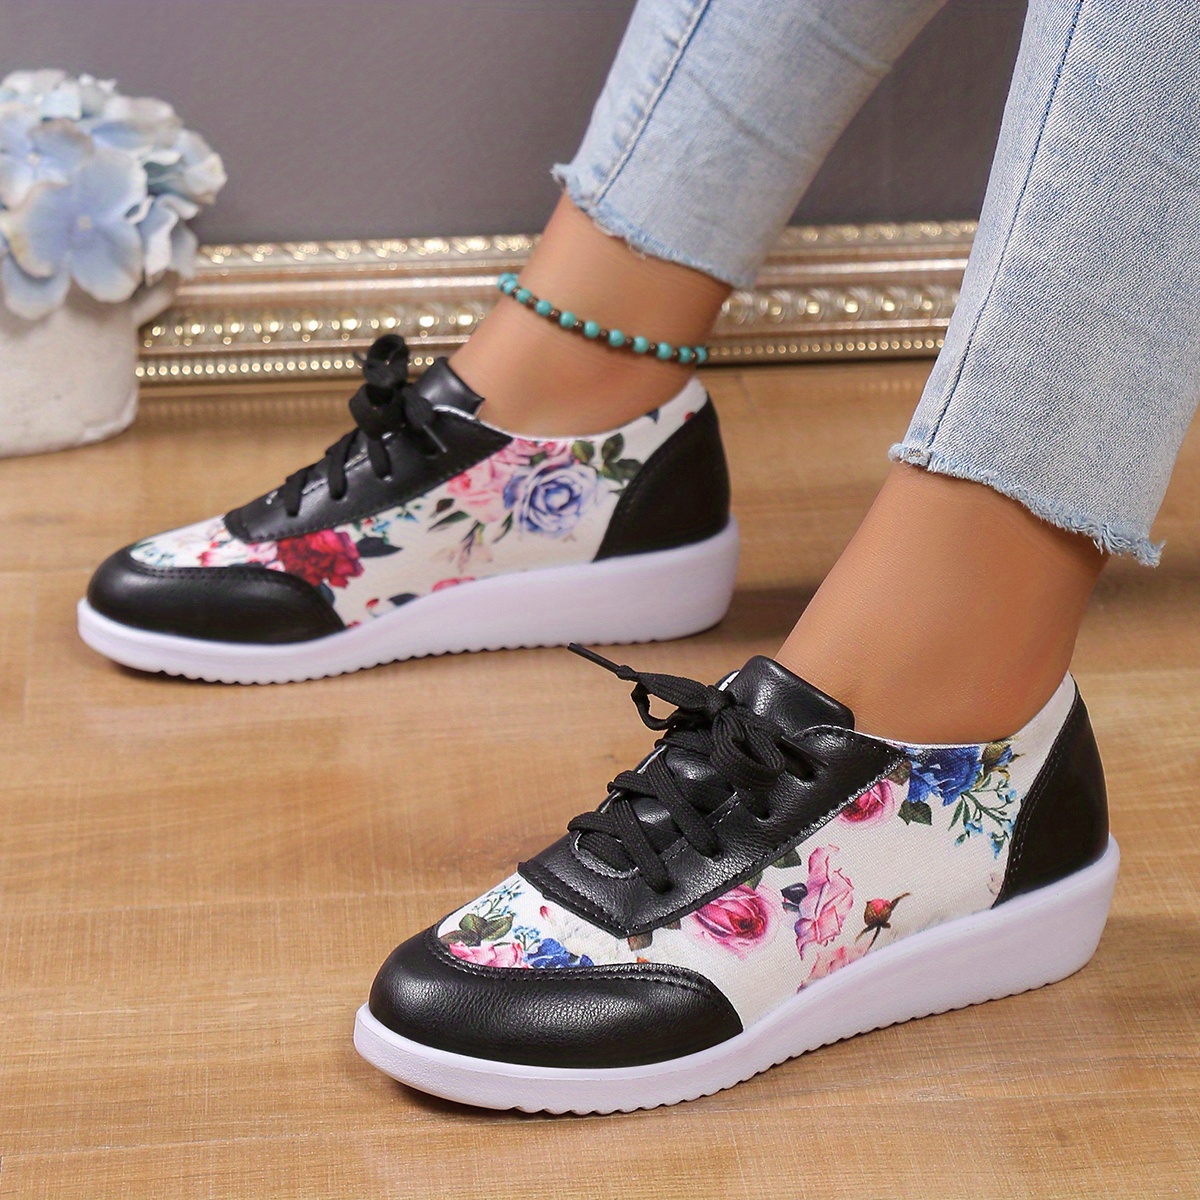 womens floral print sneakers lace up low top round toe non slip outdoor lightweight trainers casual versatile shoes details 9